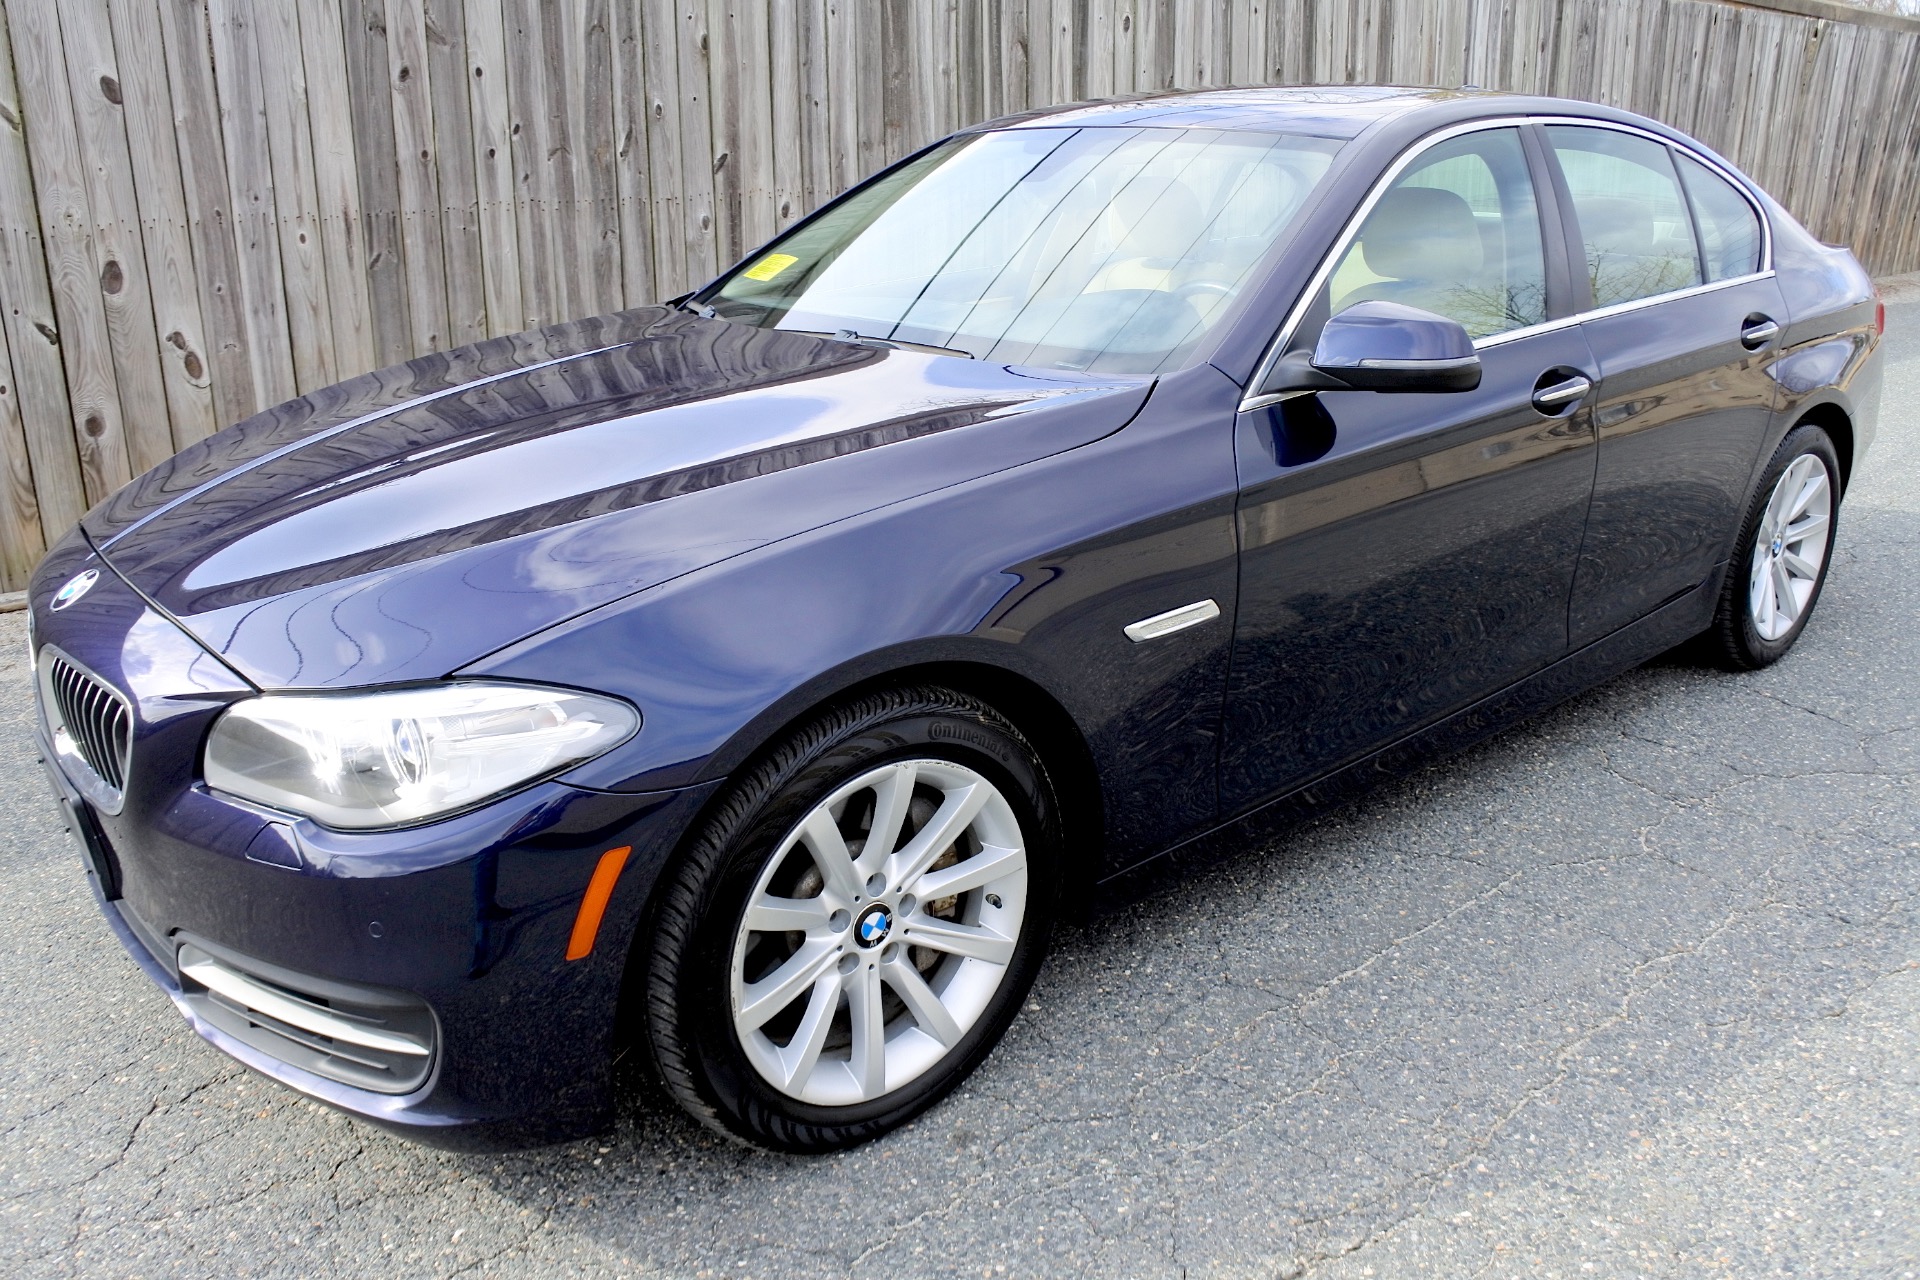 Used 14 Bmw 5 Series 535d Xdrive Awd For Sale 15 800 Metro West Motorcars Llc Stock